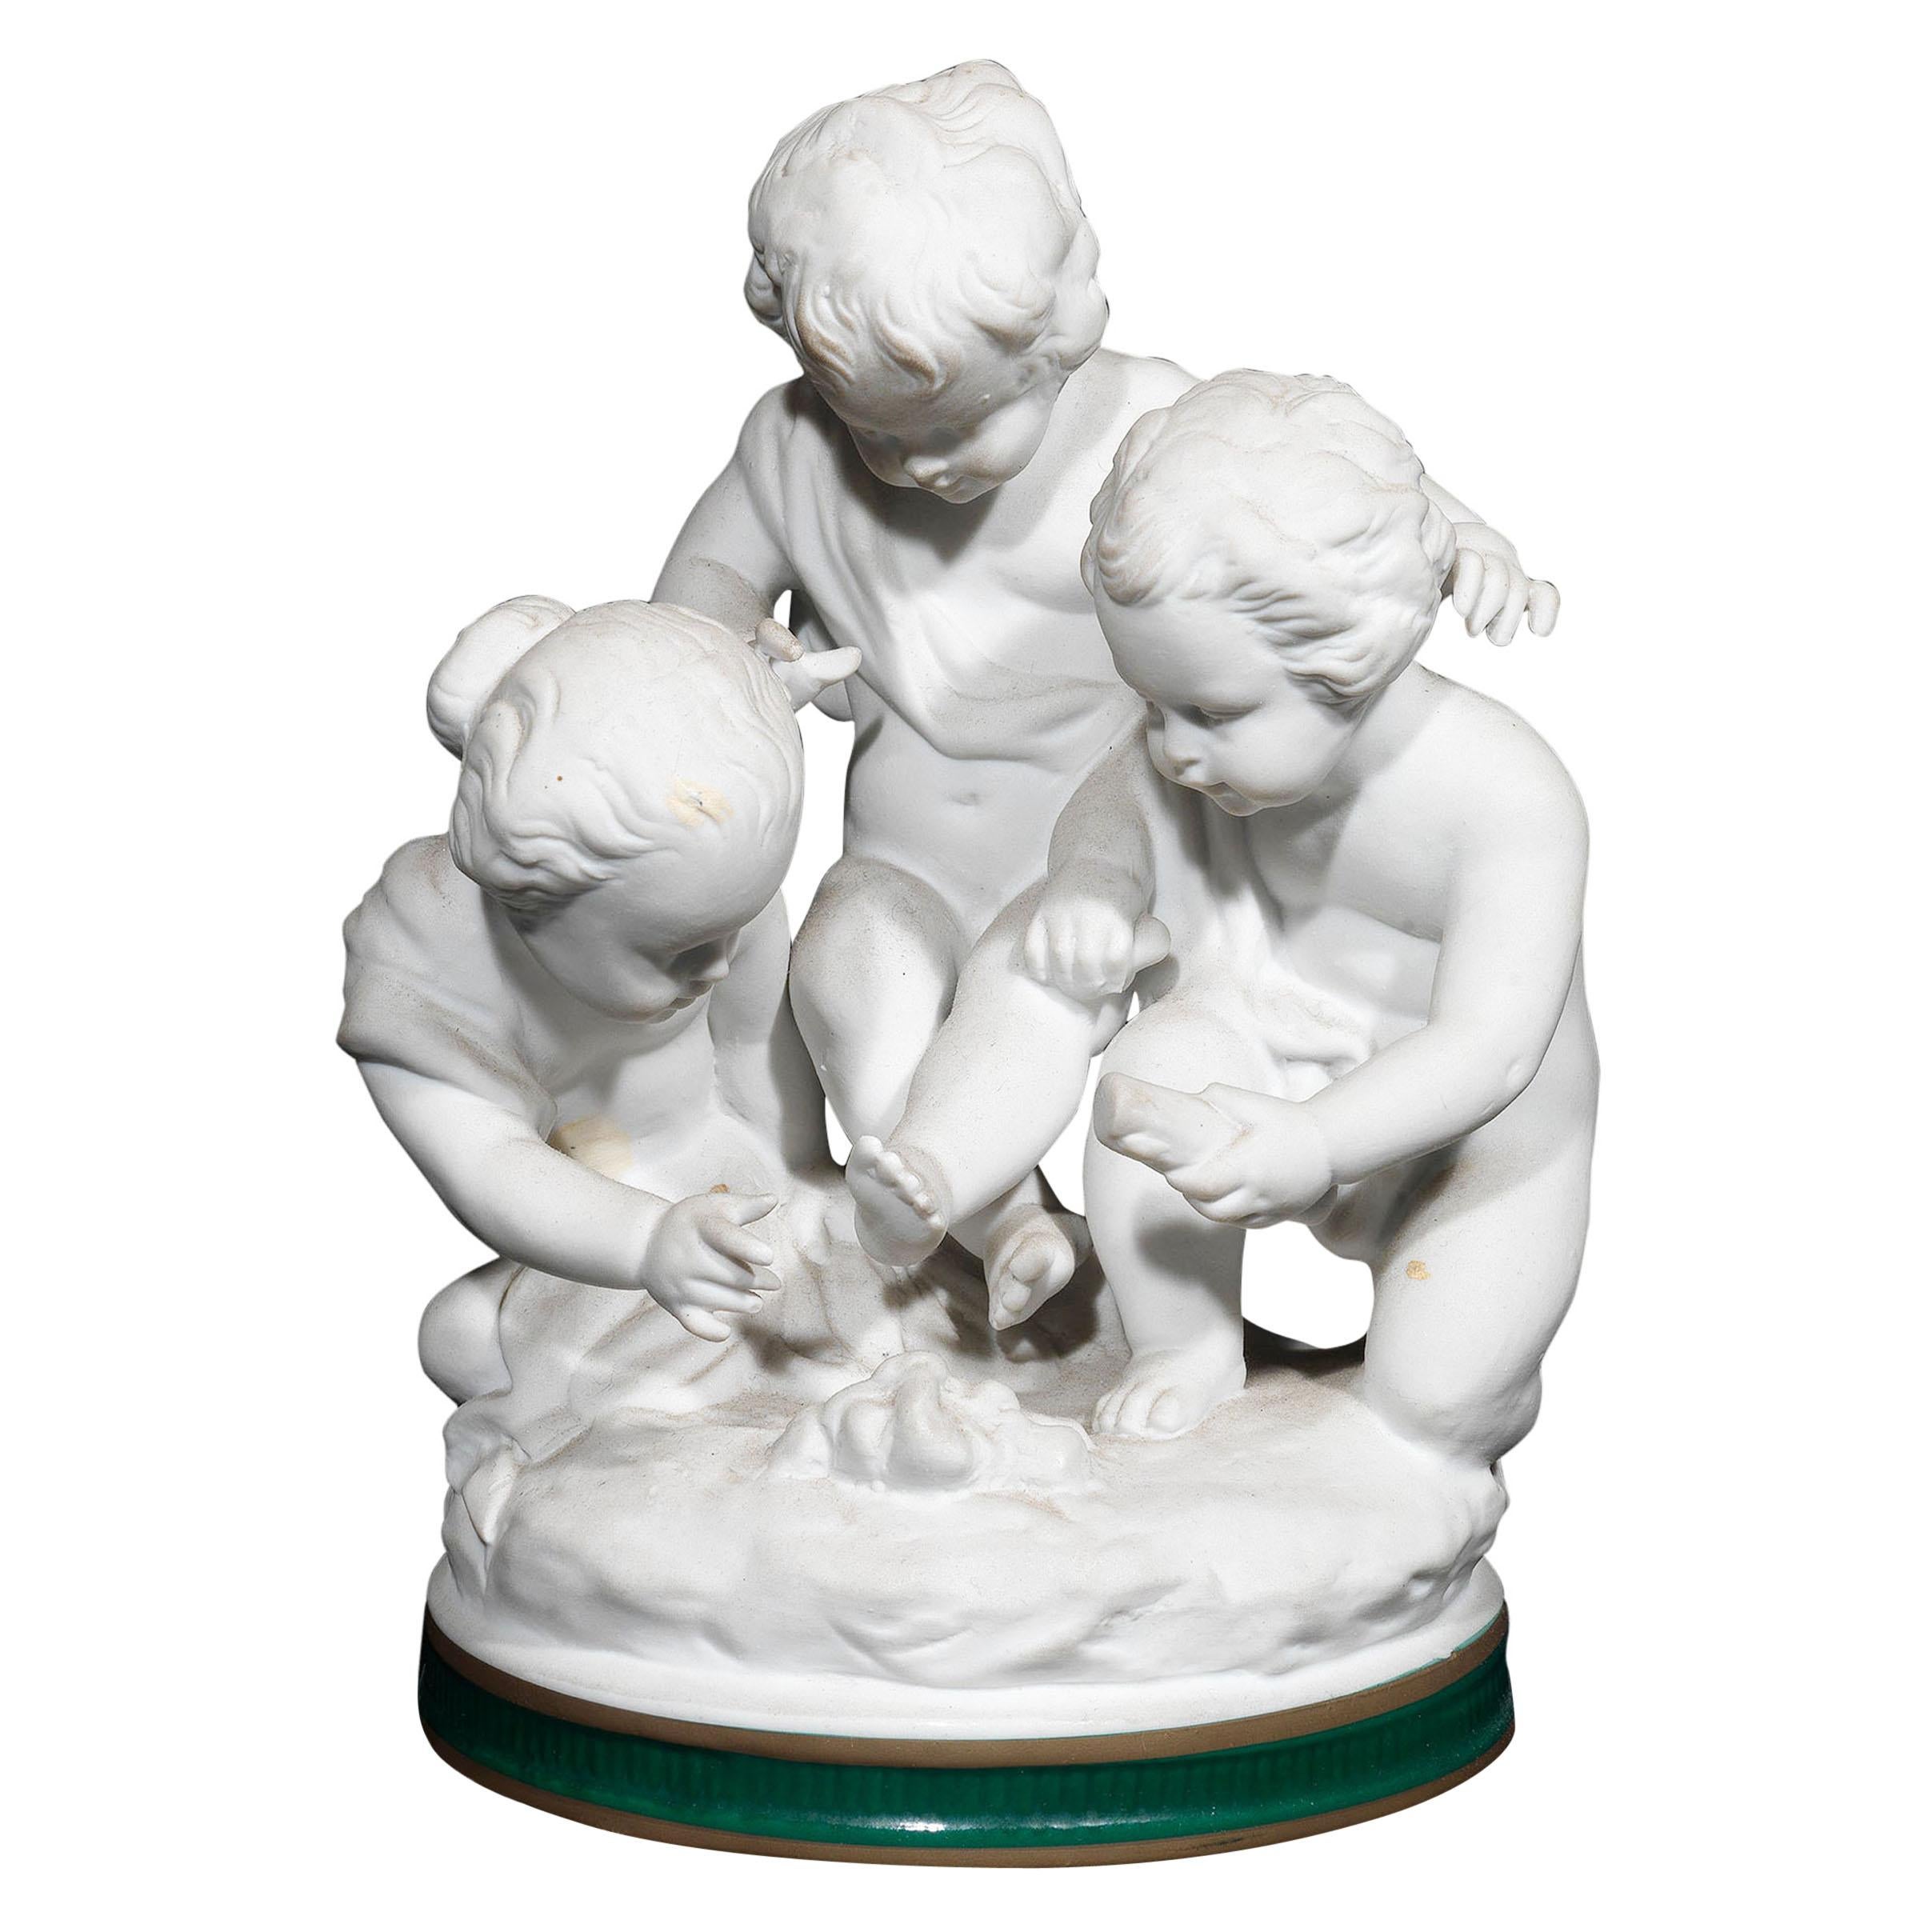 A 20th Century Capodimonte bisque group of the putti